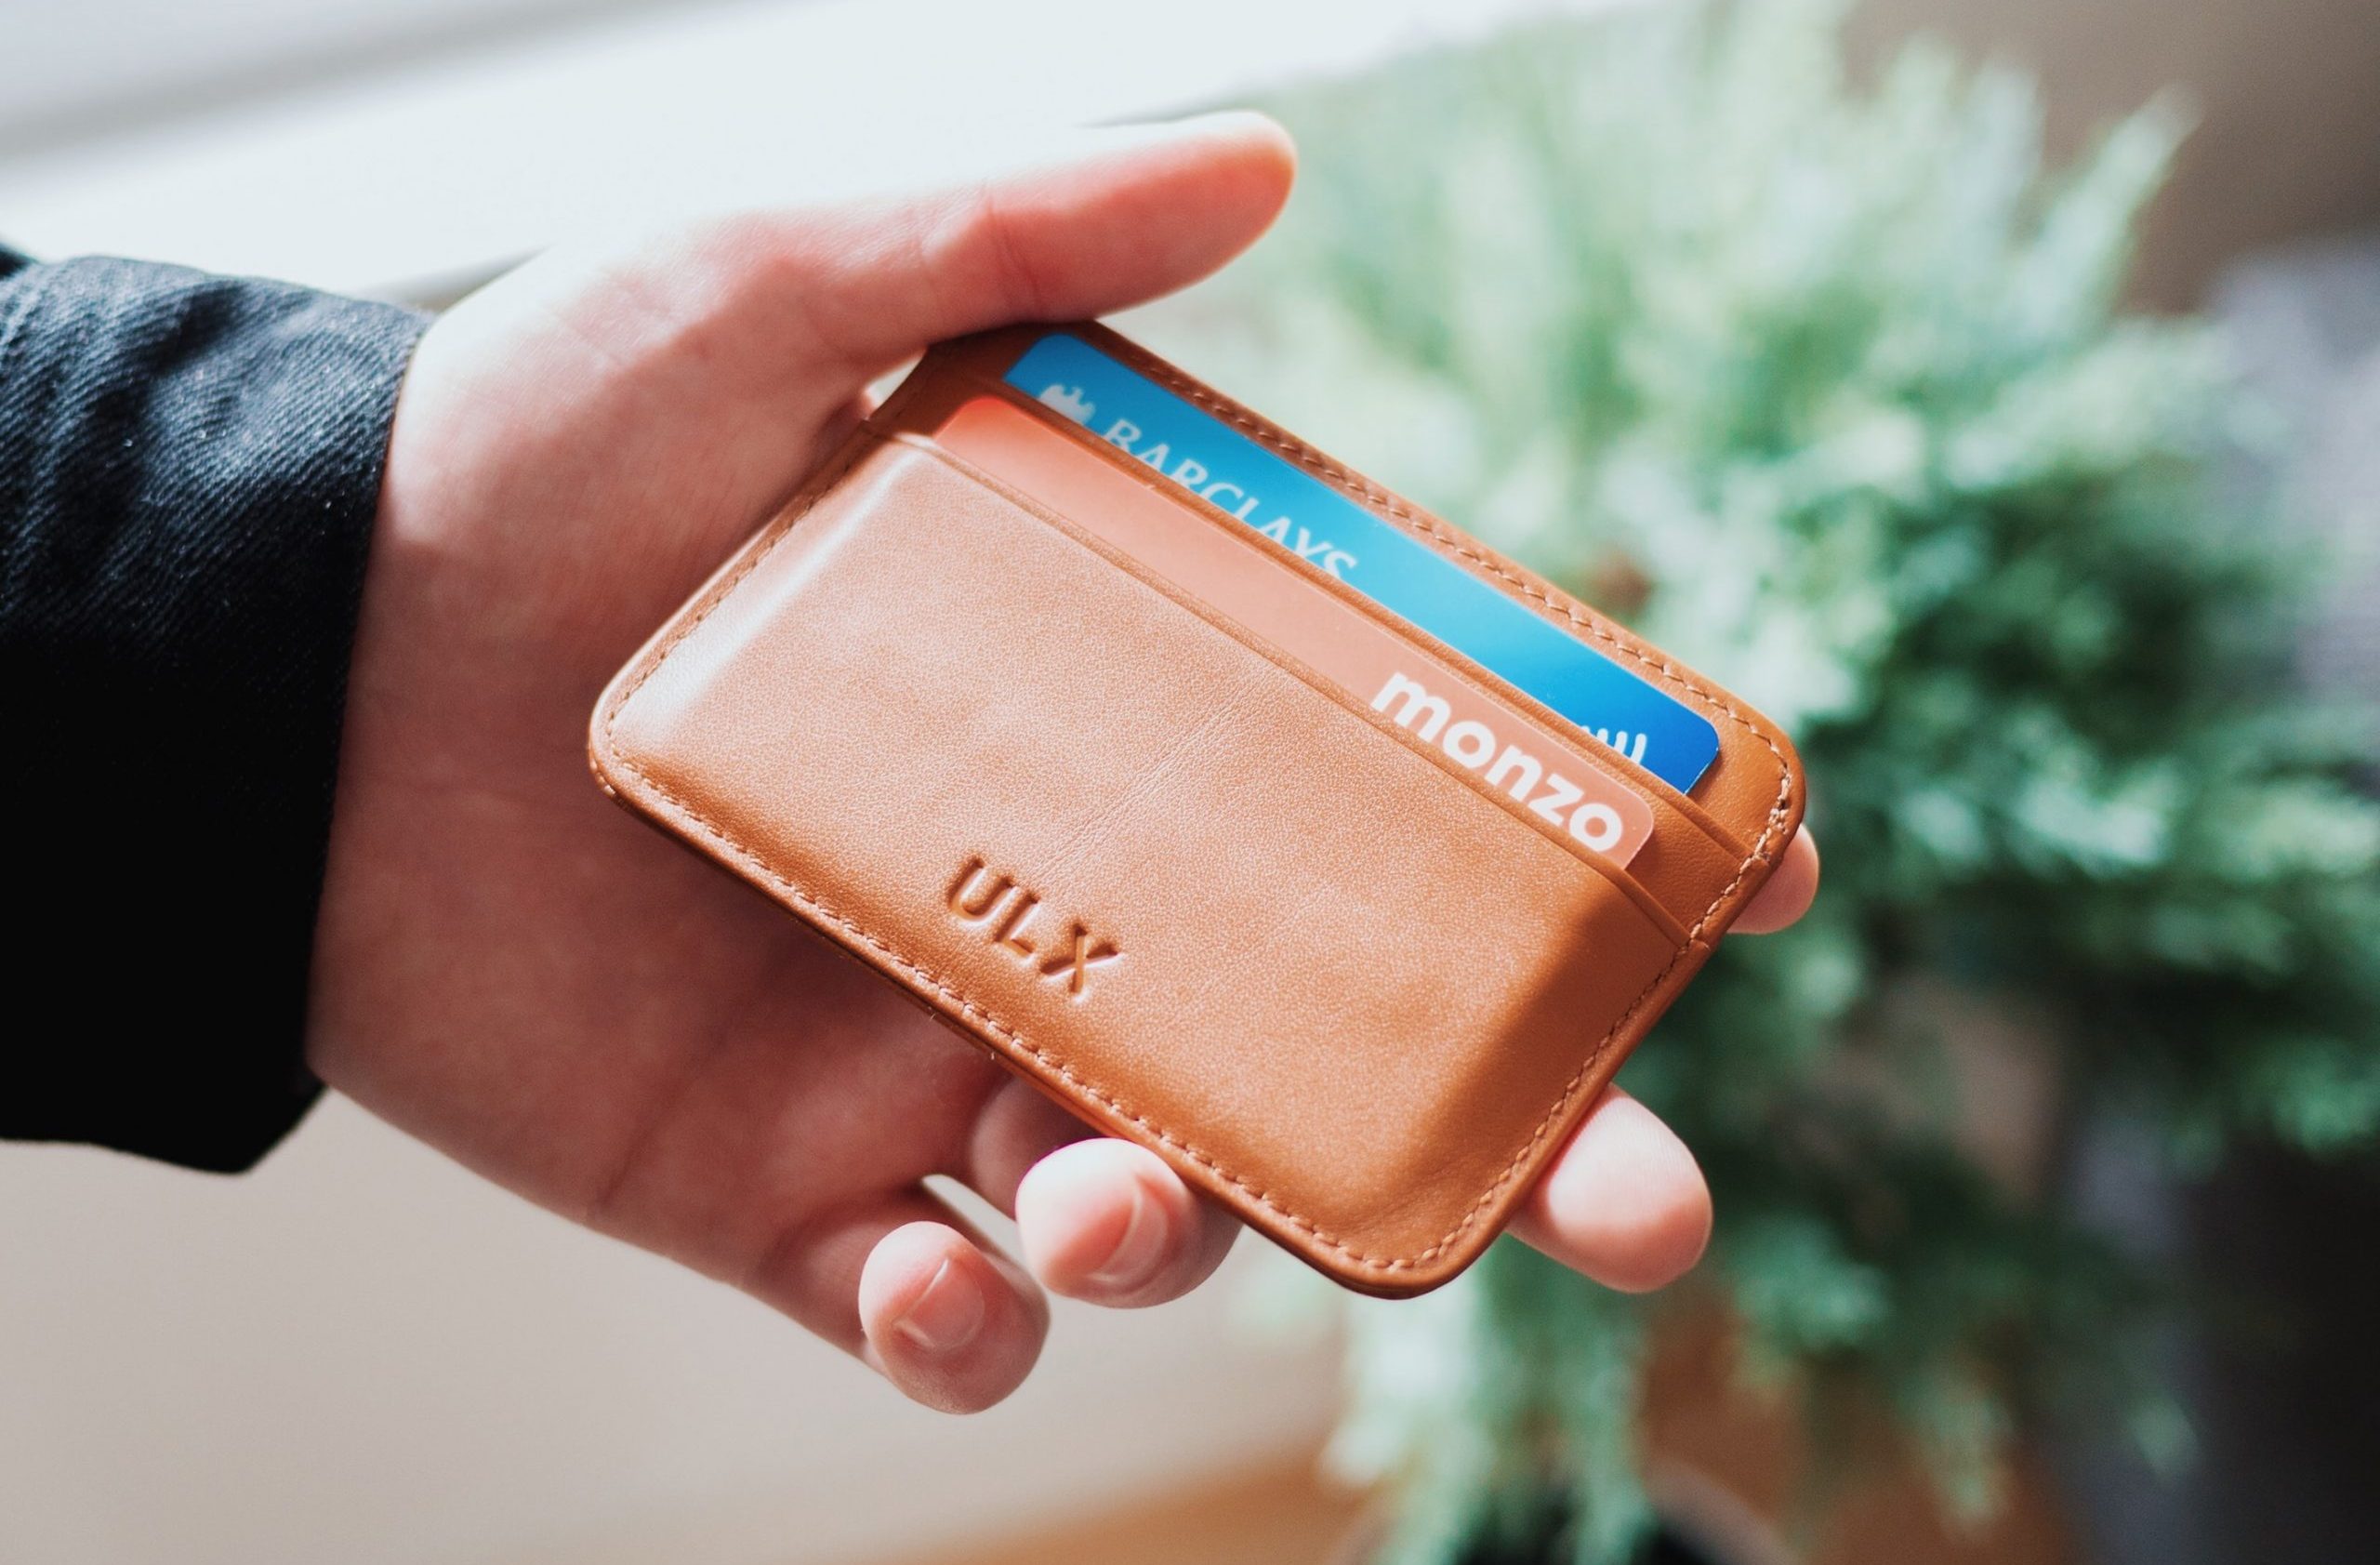 Close-up of a hand holding a leather wallet with two credit cards - monzo and Barclays.